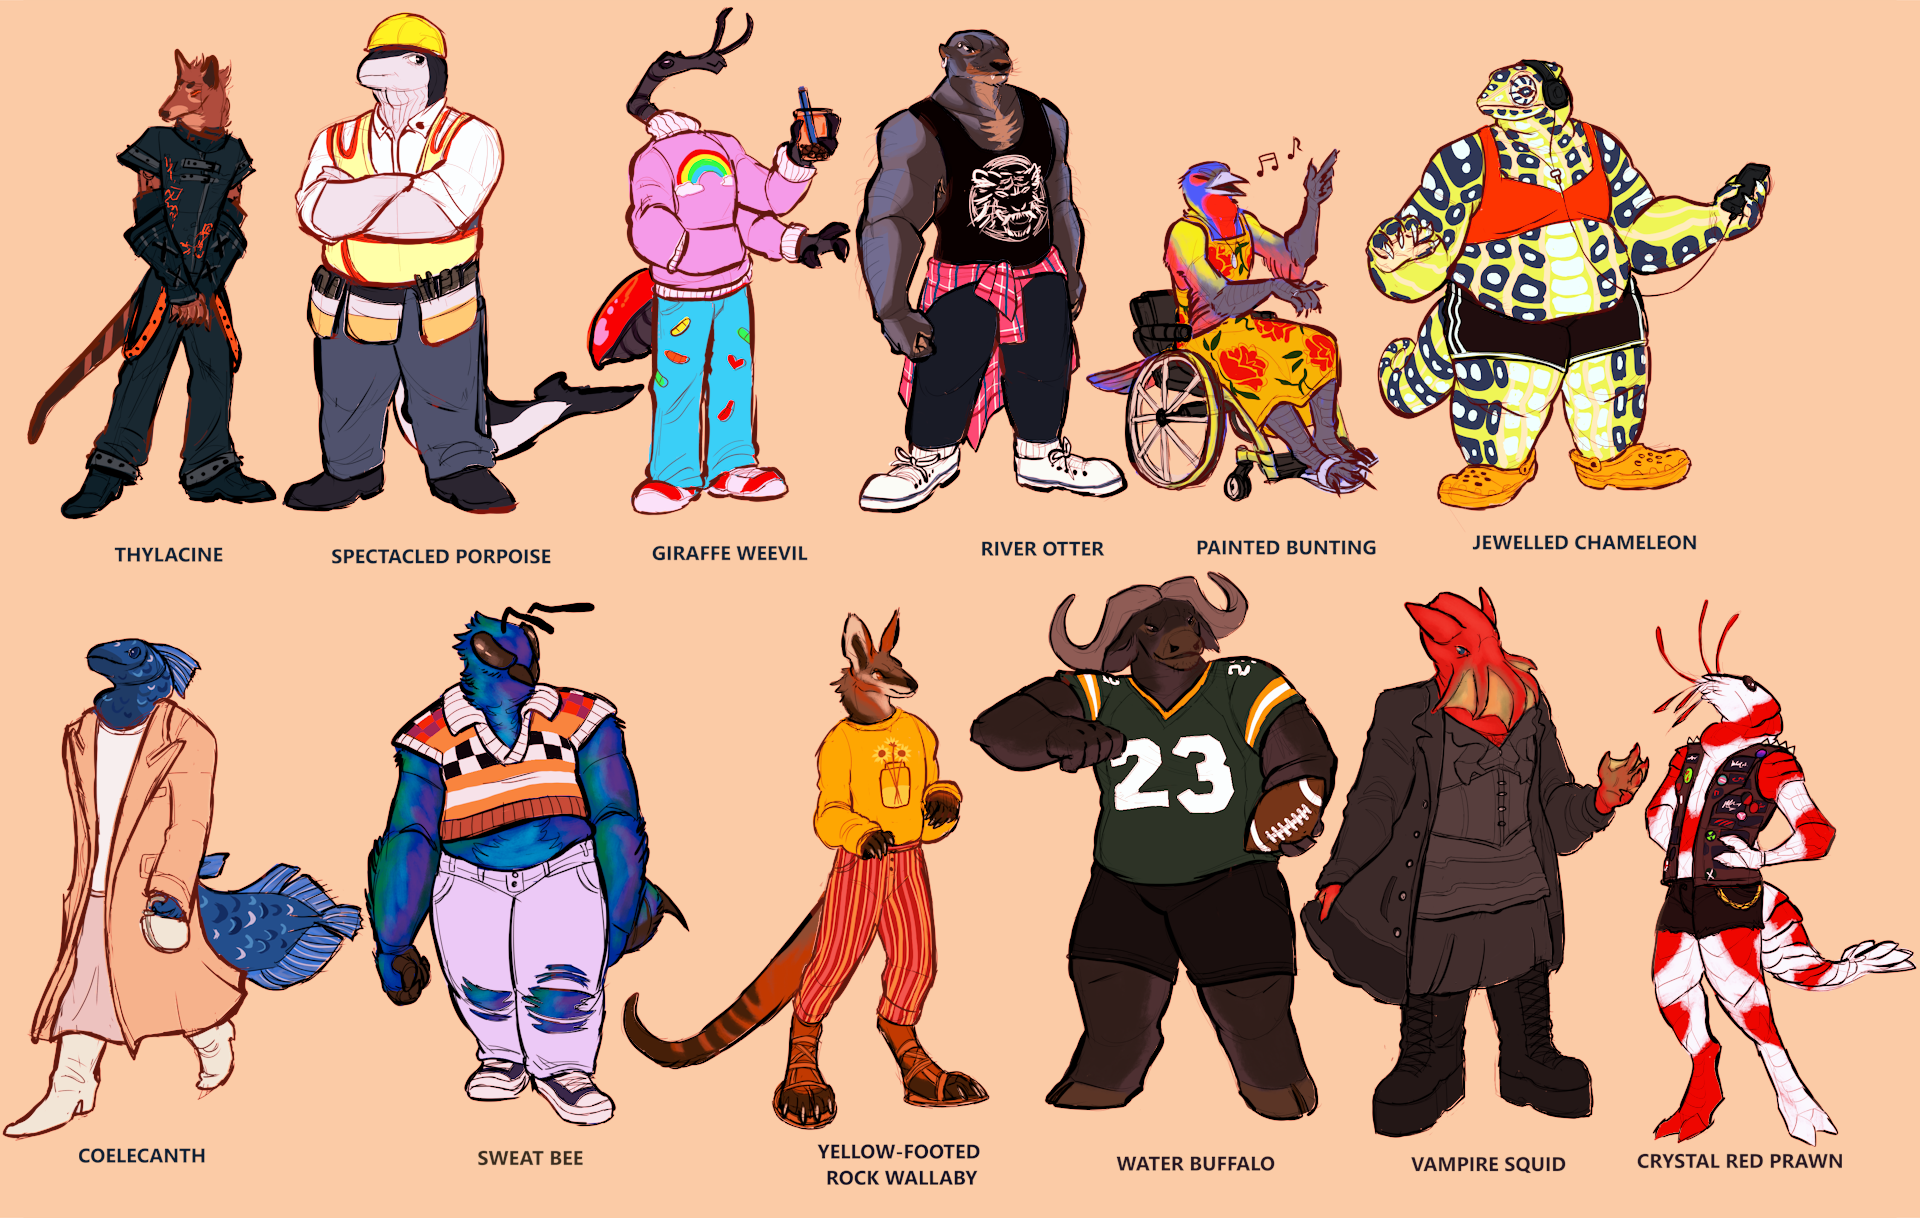 A lineup of anthropomorphic citizens of earth. In order: a visual kei thylacine, a construction worker spectacled porpoise, a y2k giraffe weevil, a hipster river otter, a painted bunting singer, an athletic jeweled chameleon, a coelecanth businesswoman, a sweat bee in a colorful crop top, a yellow-footed rock wallaby in a yellow sweater, a Provincian football player water bufflo, a classical goth vampire squid, and a punk crystal red prawn.